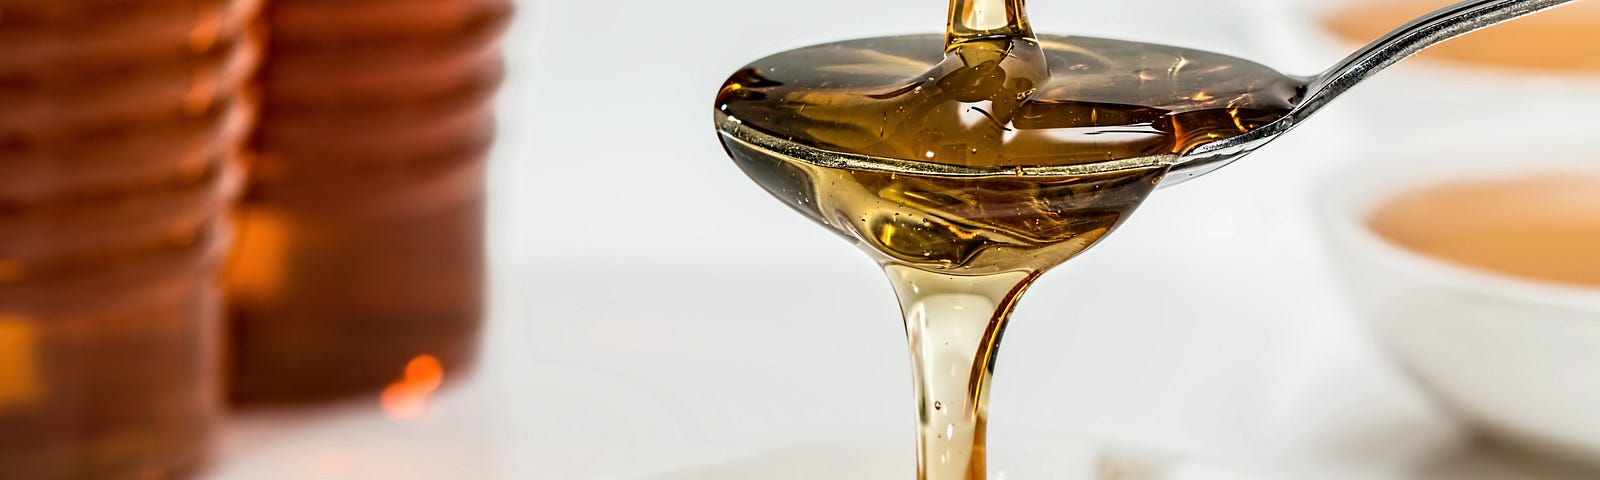 closeup photograph of maple syrup being poured into a bowl and spoon